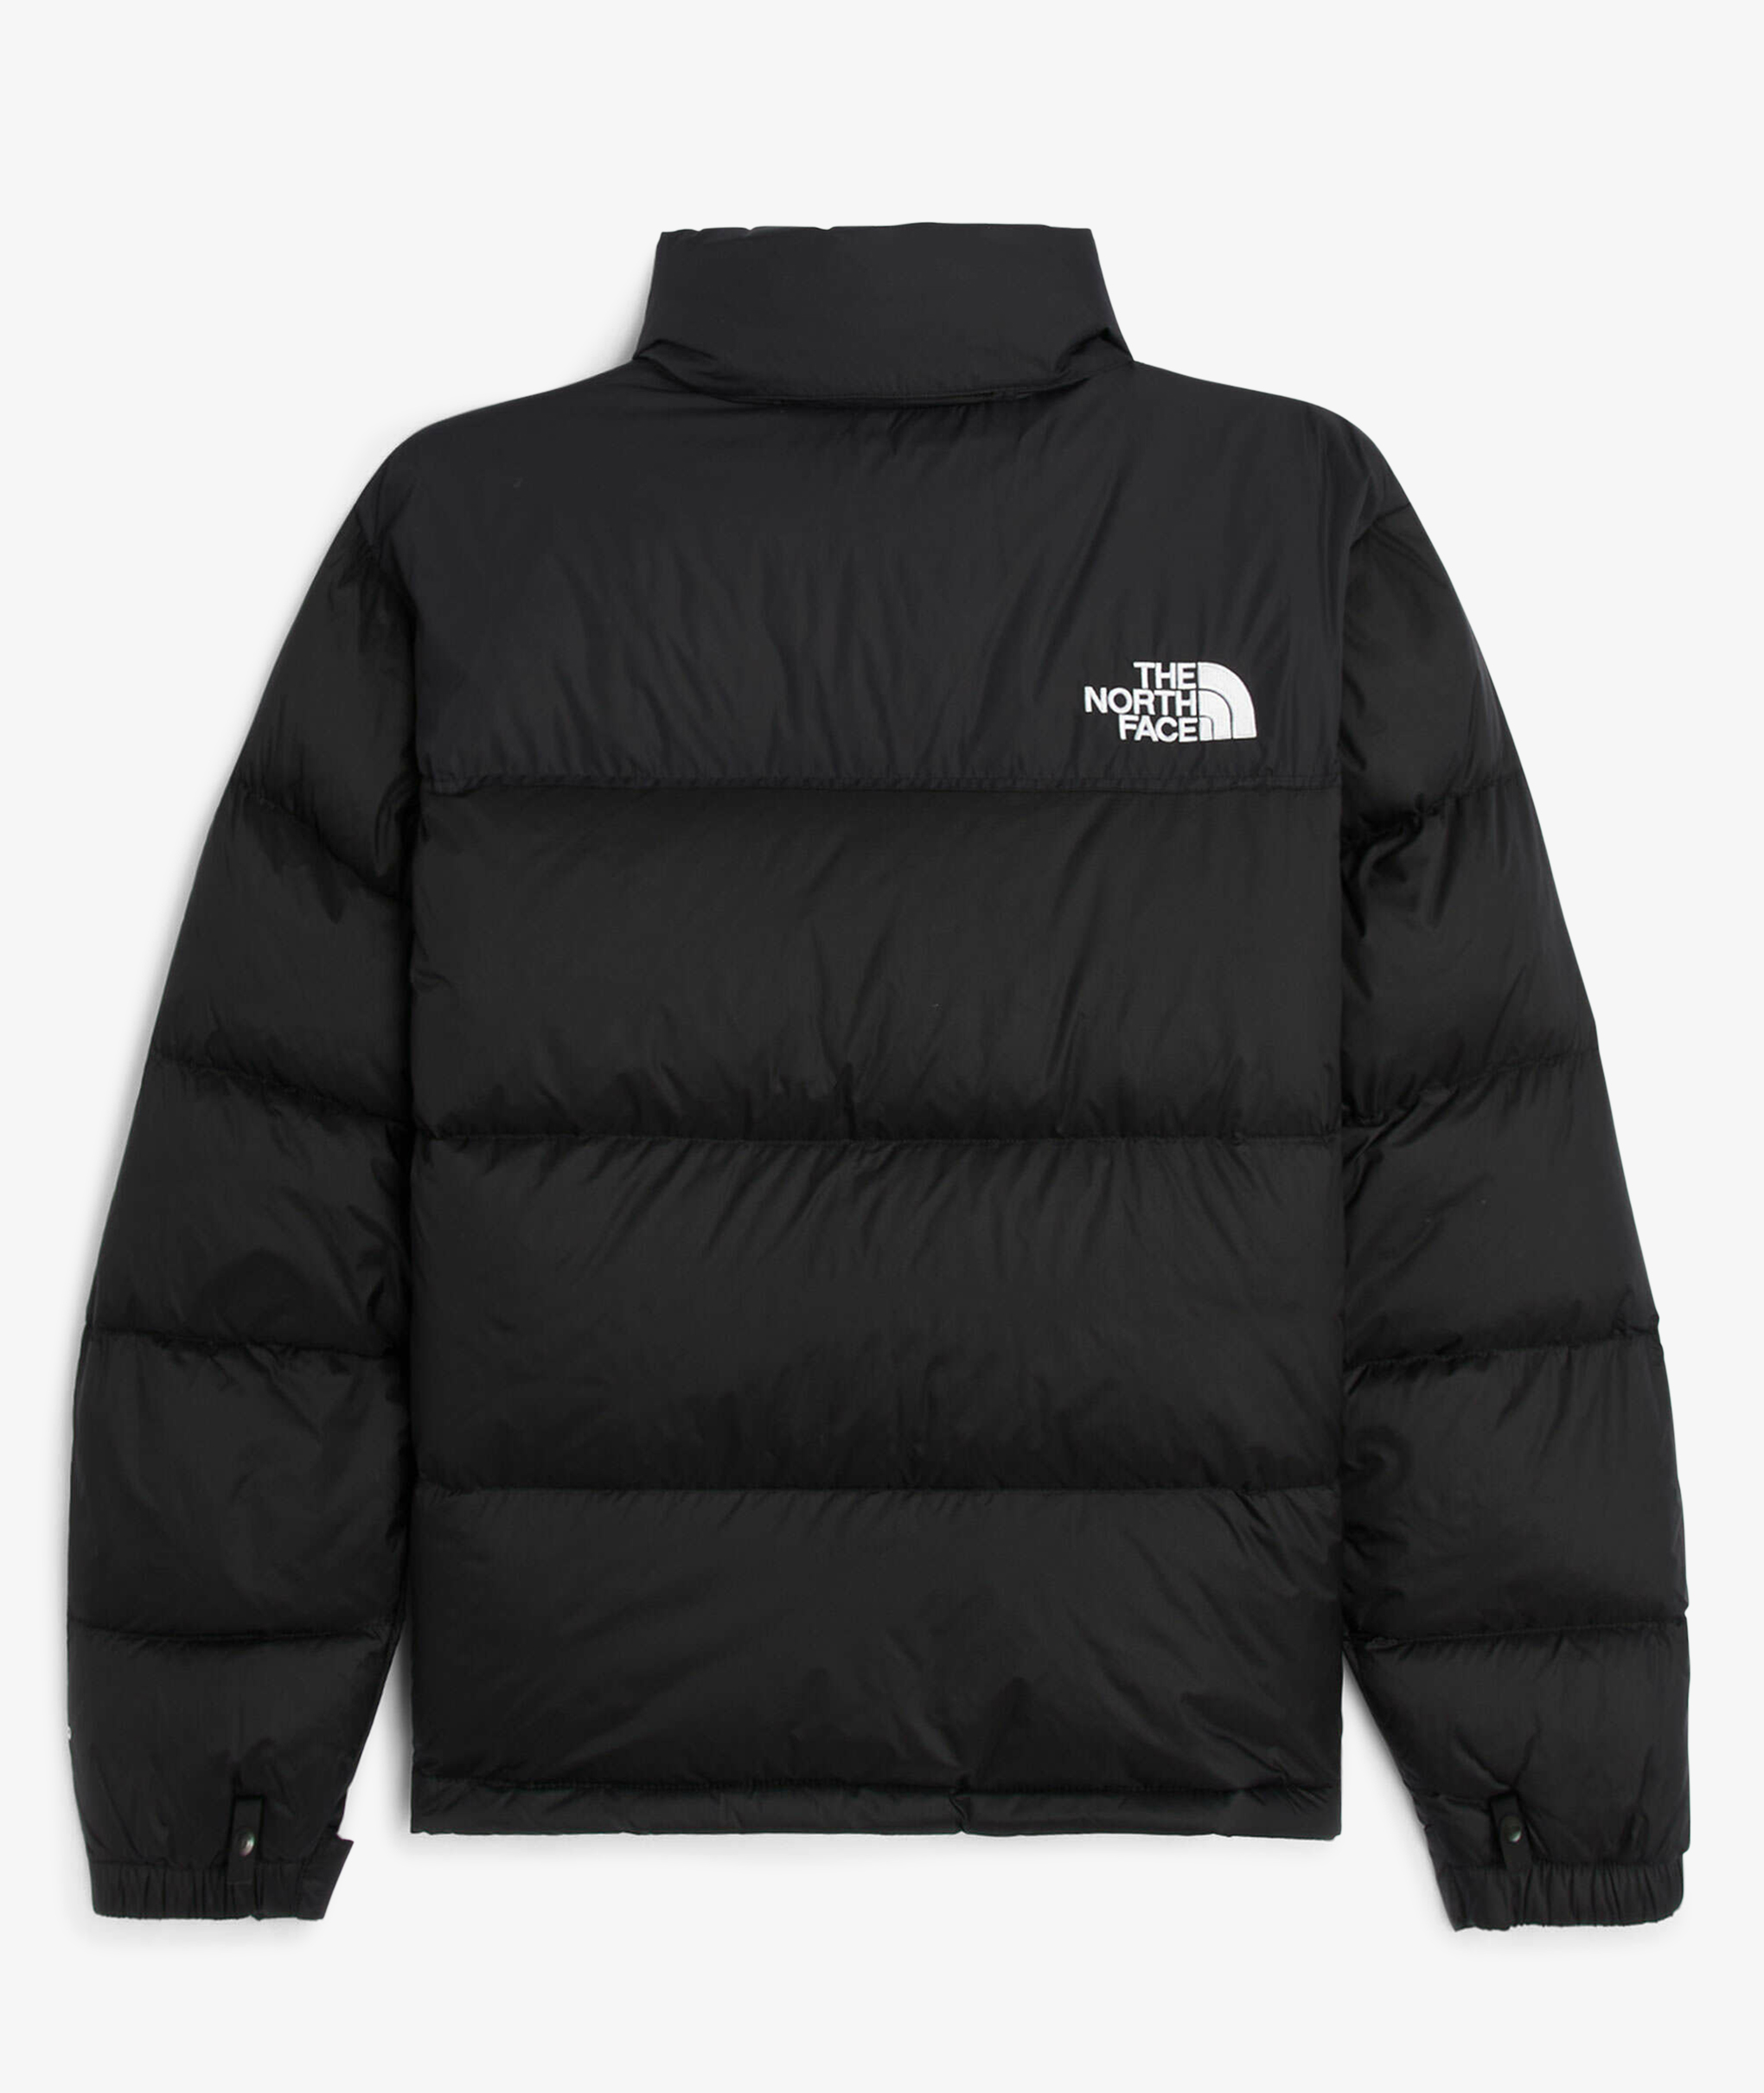 Norse Store  Shipping Worldwide - The North Face 1996 Retro